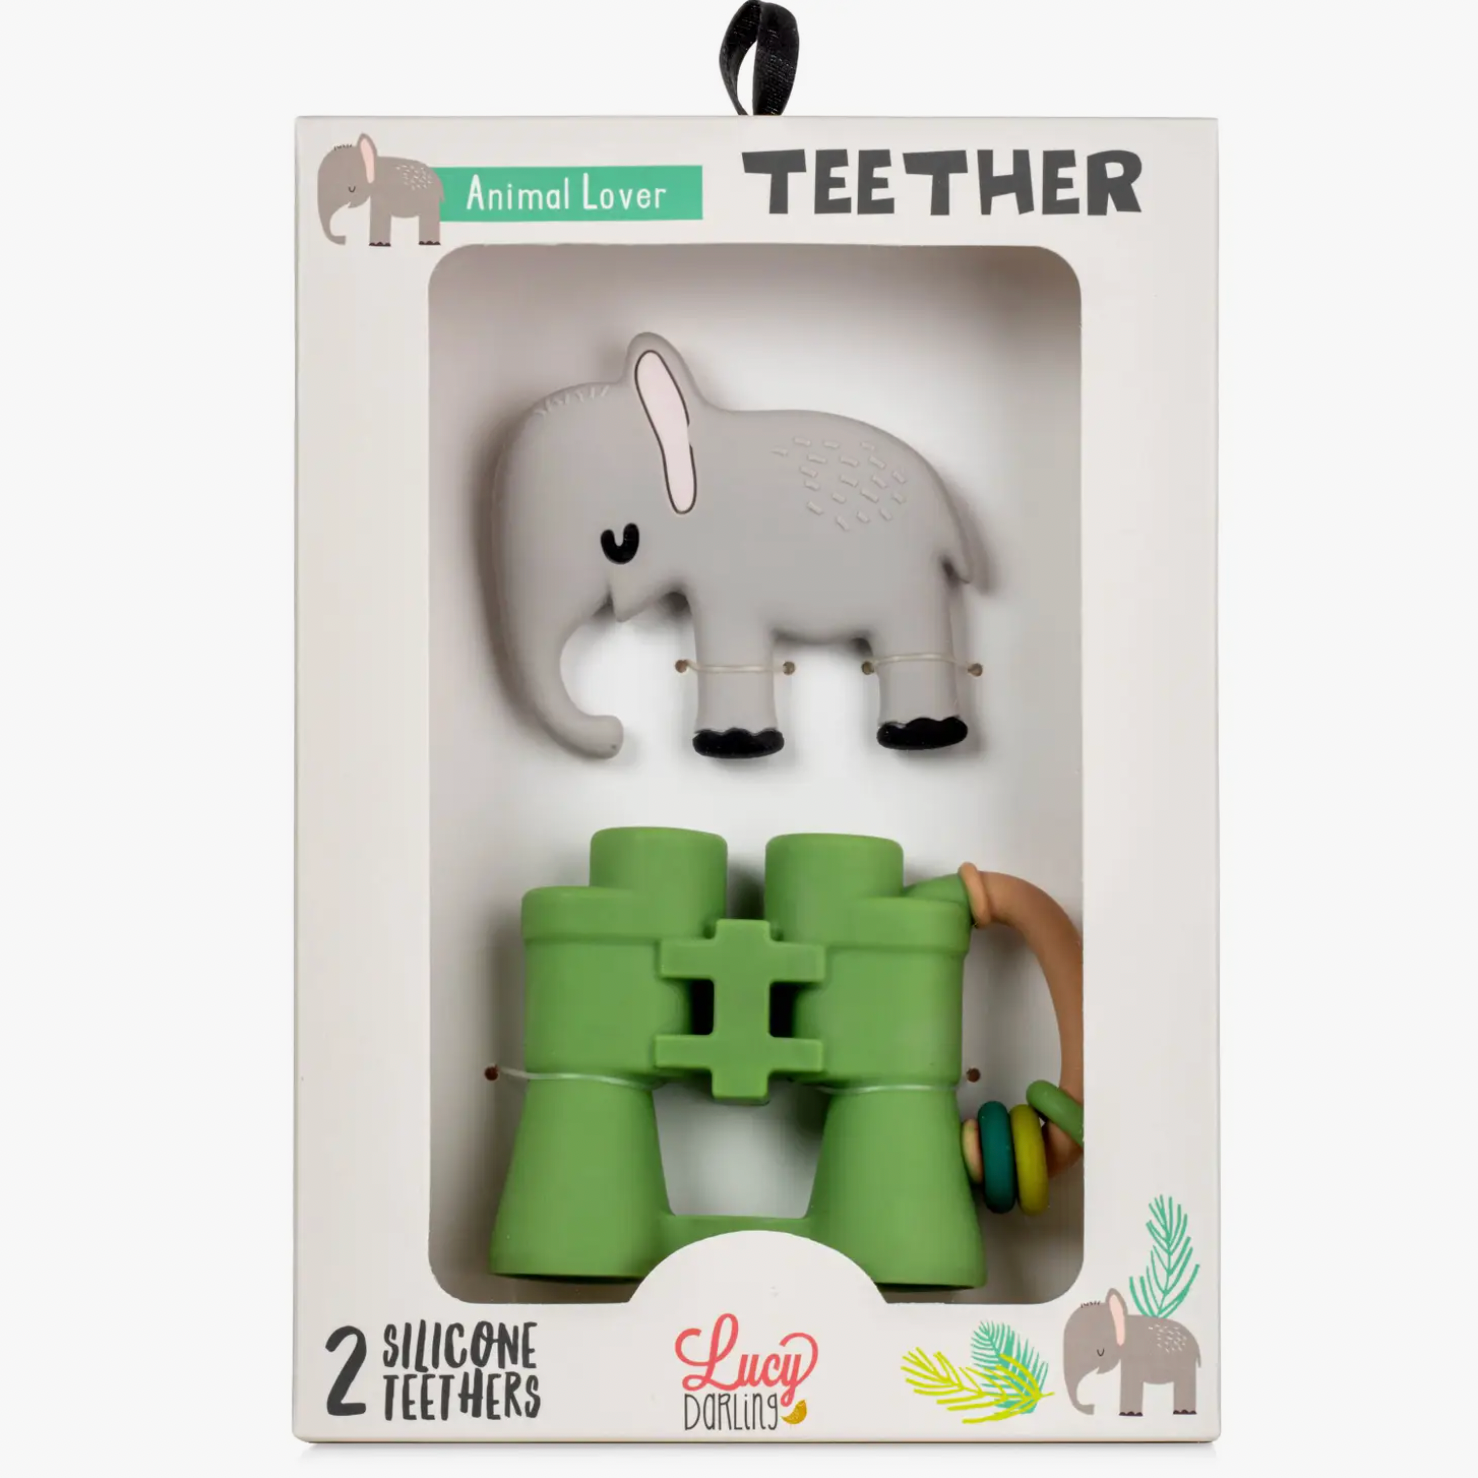 Animal Lover Teether Toys